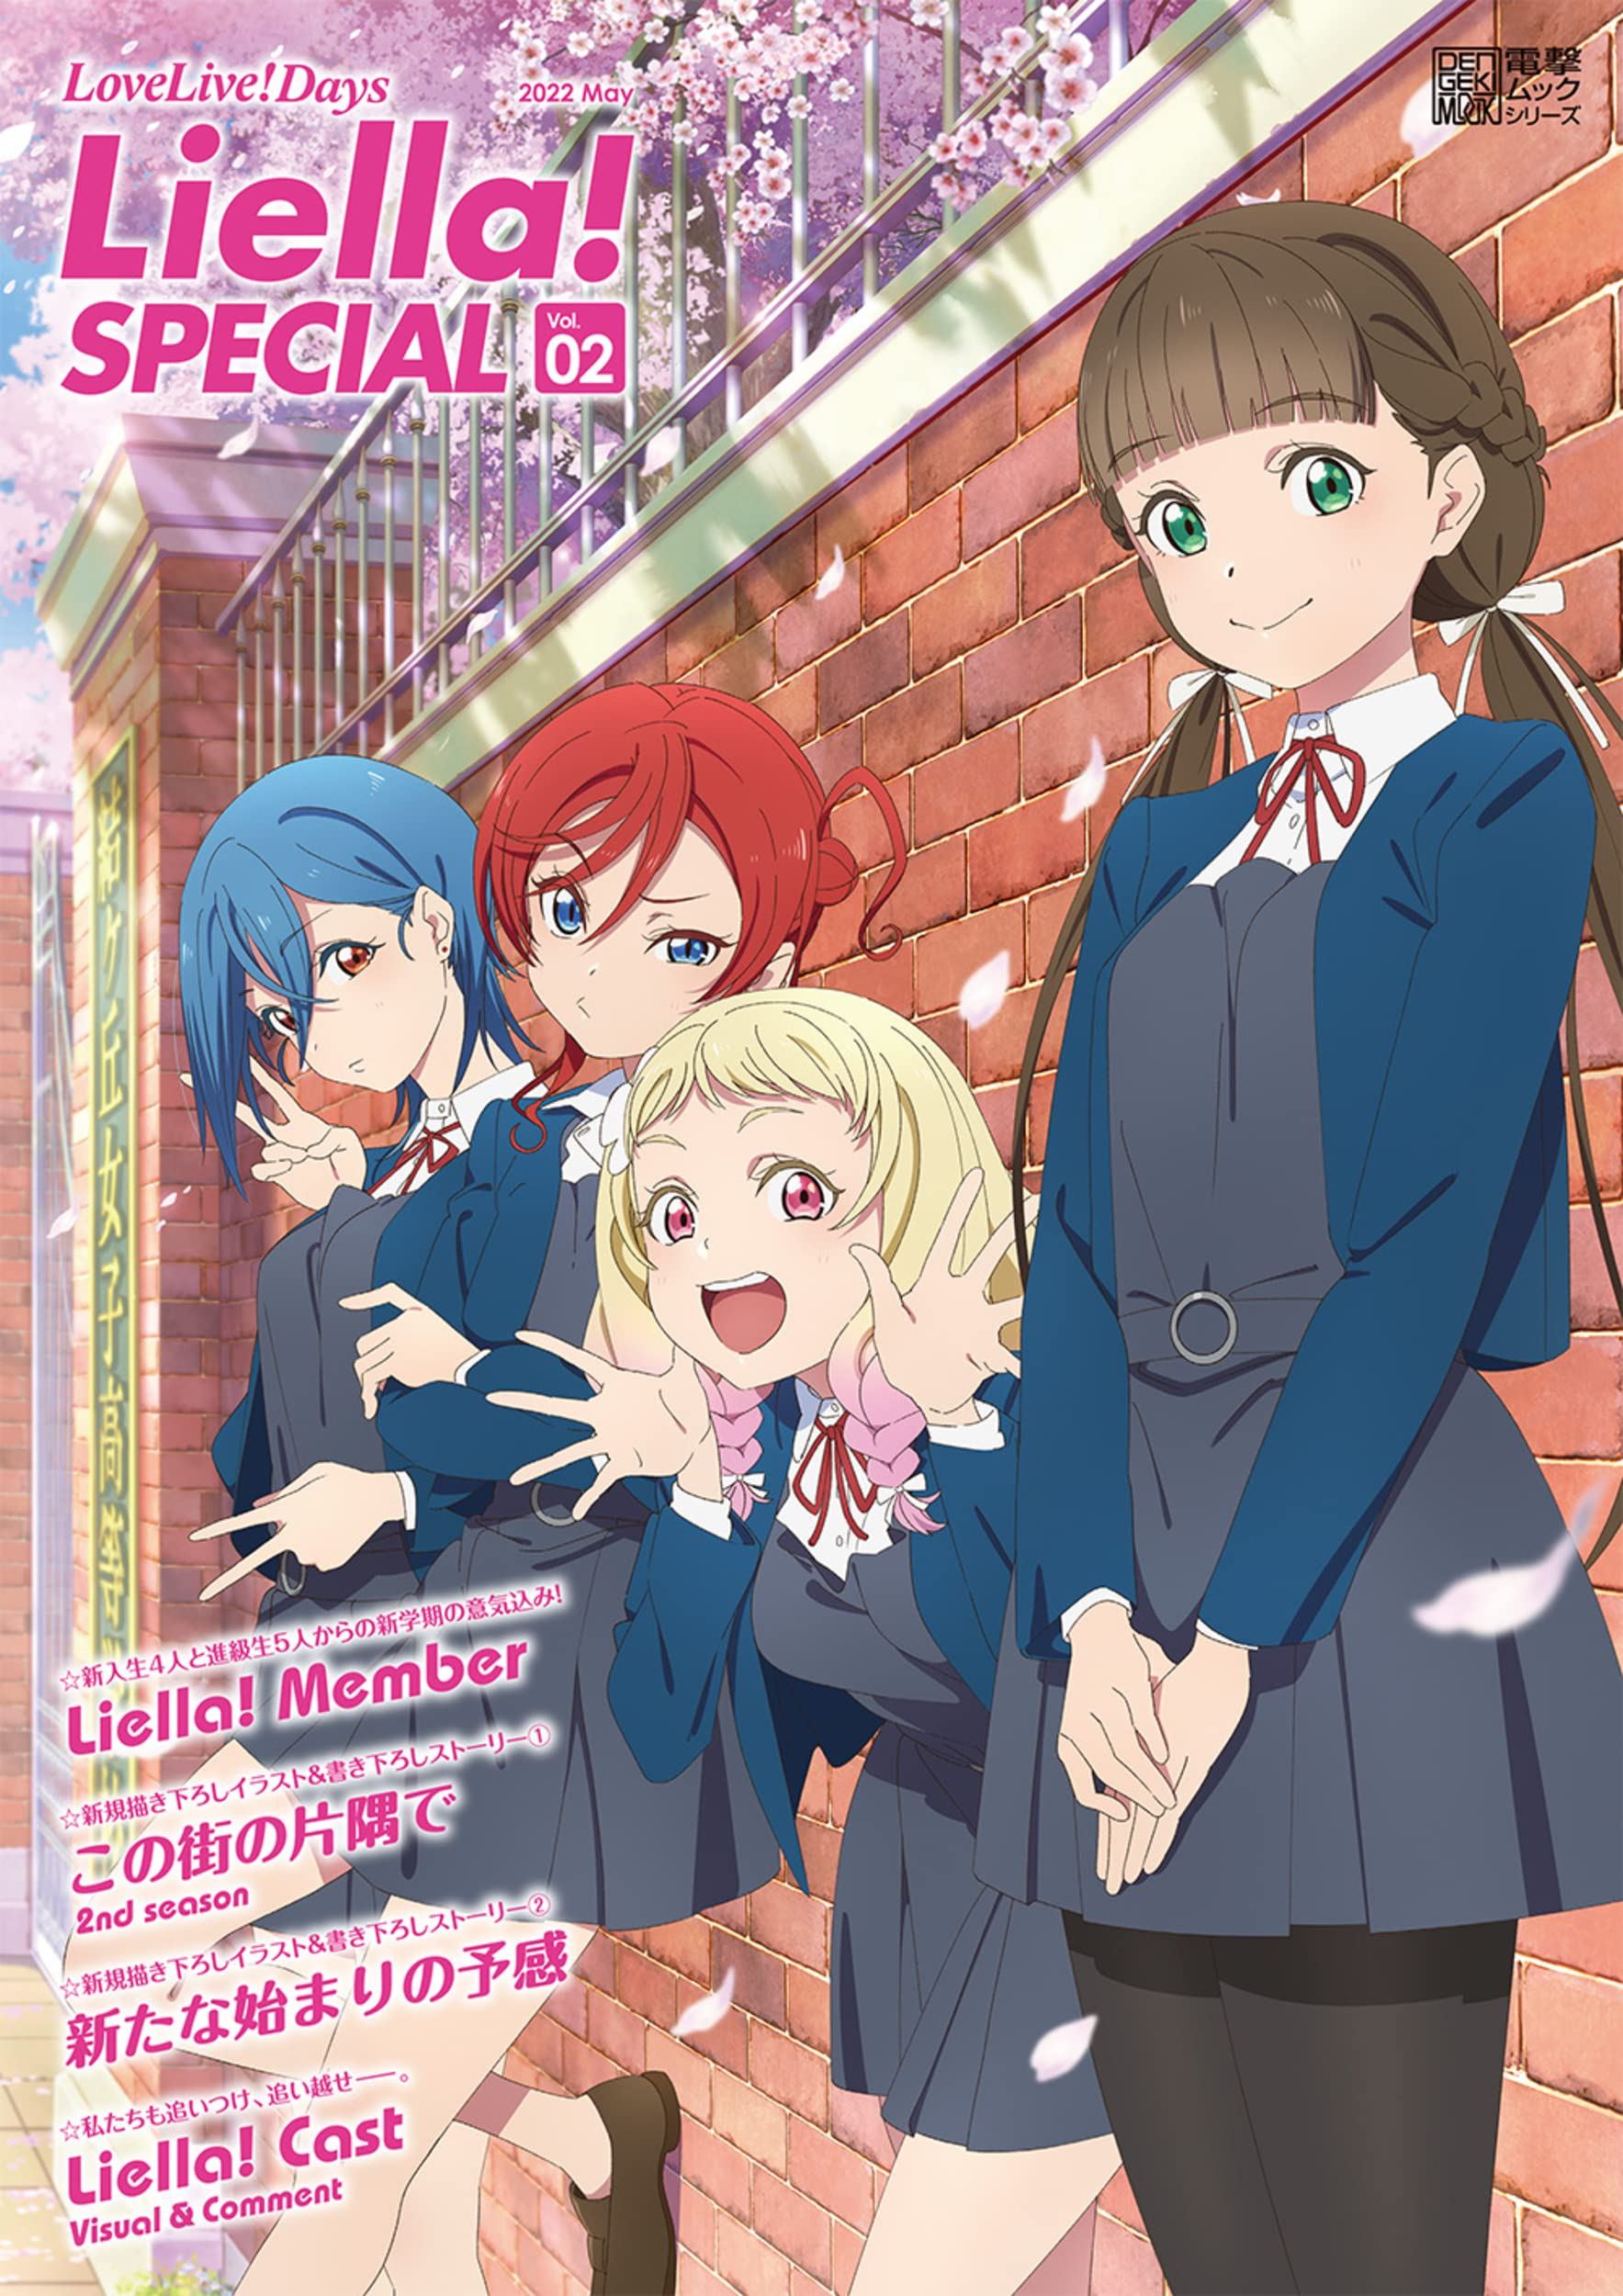 LoveLive! Days Liella! Special Vol.02 2022 May - Bitcoin